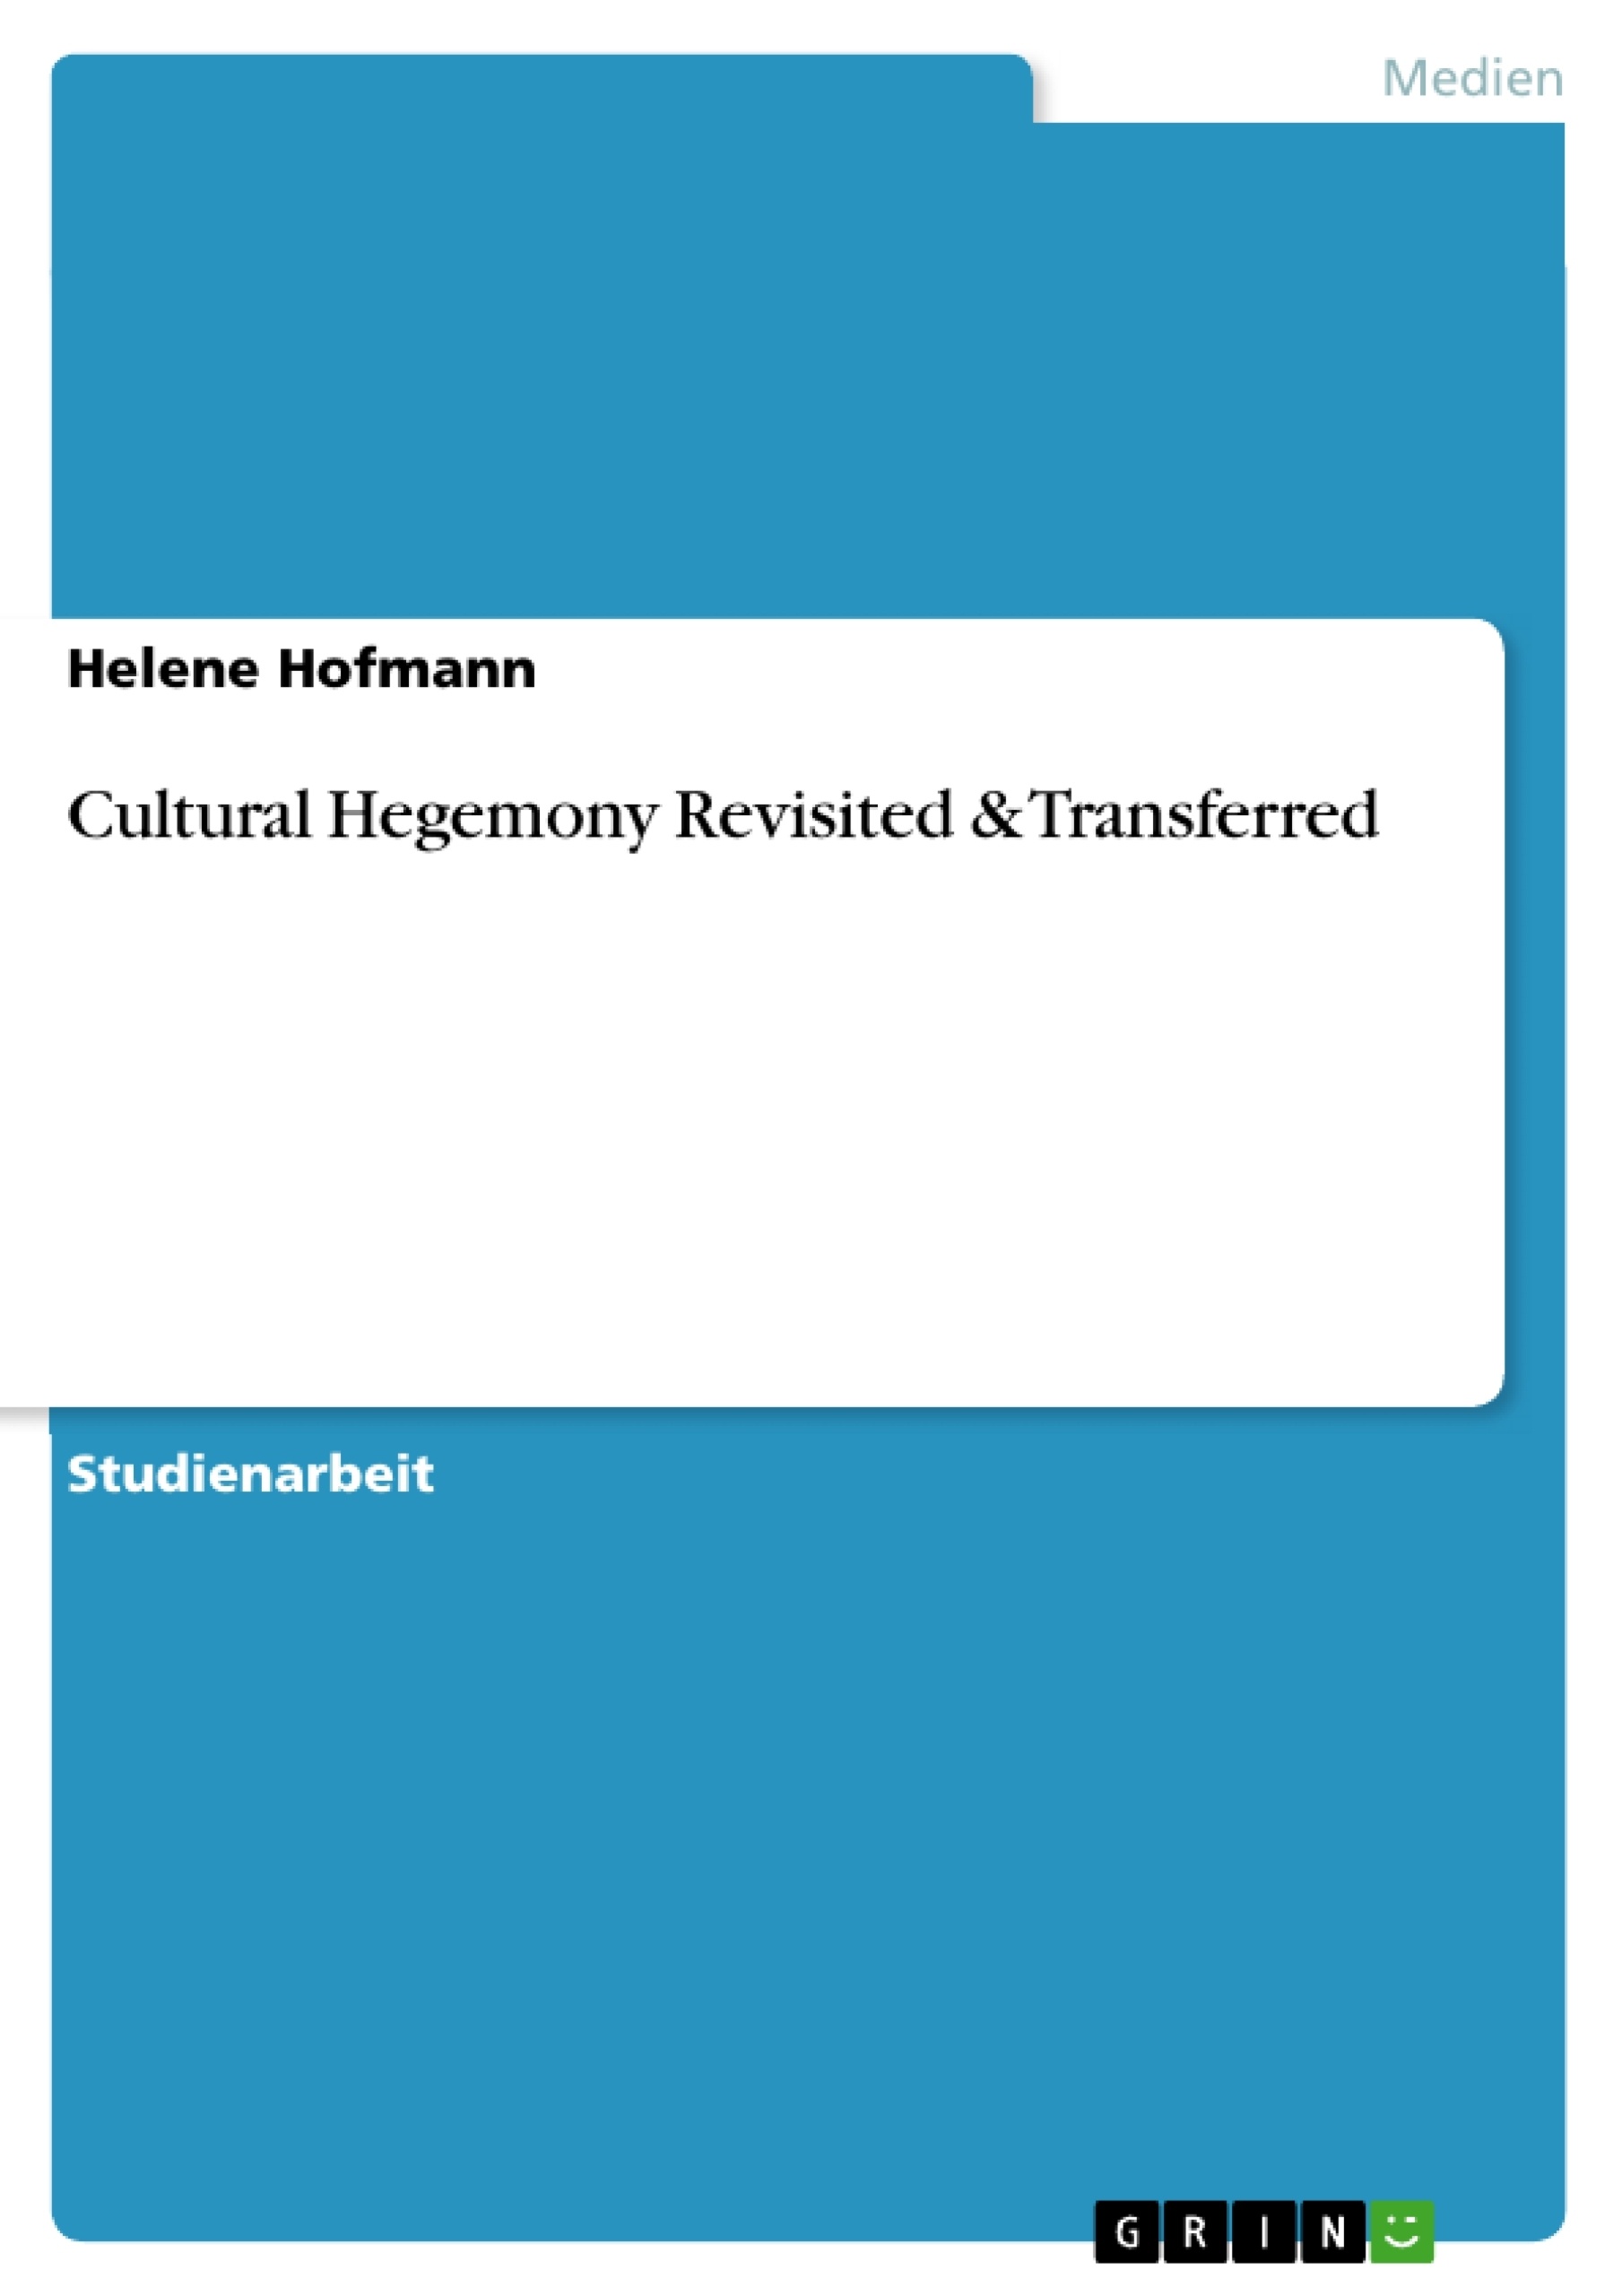 Título: Cultural Hegemony Revisited & Transferred